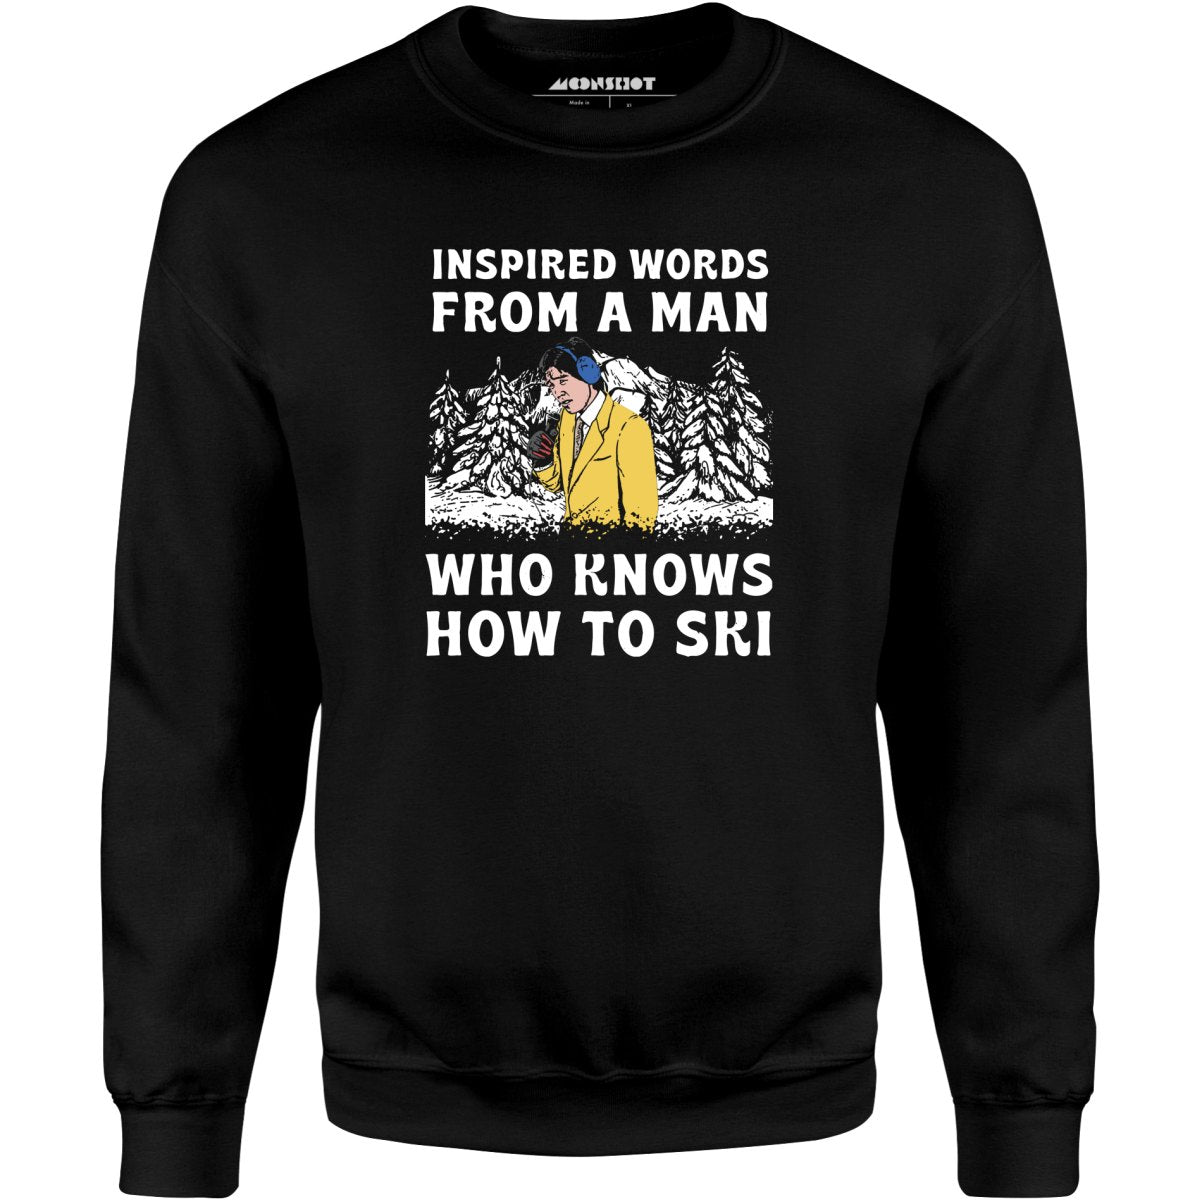 Inspired Words From a Man Who Knows How to Ski - Unisex Sweatshirt